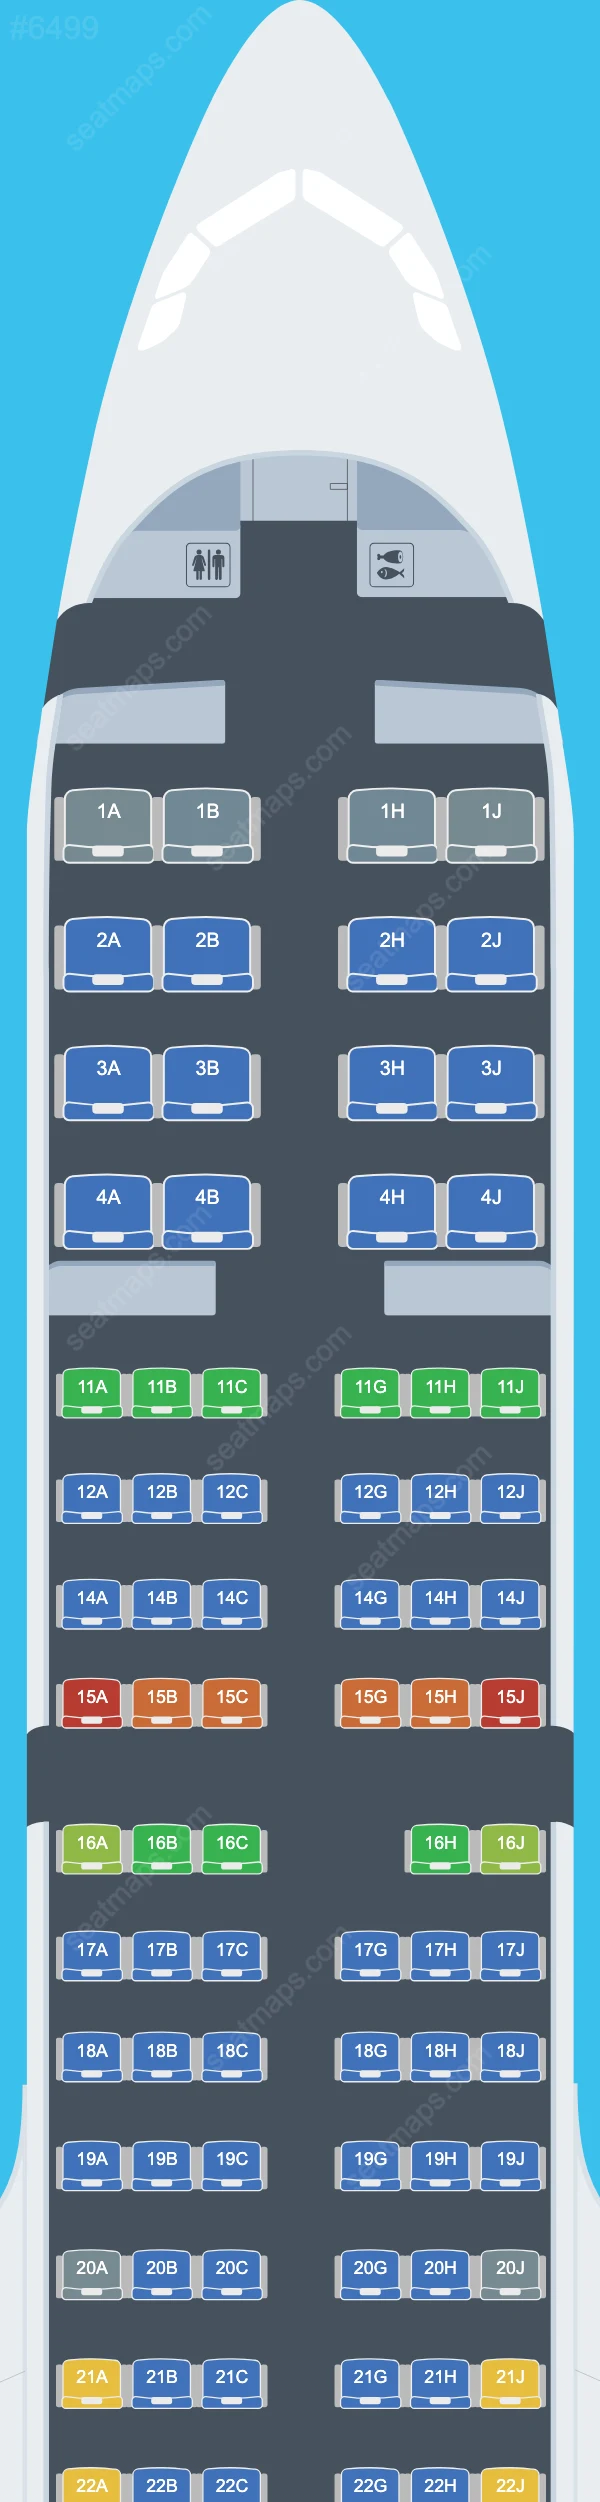 Hawaiian Airlines Airbus A321 Seat Maps A321-200neo